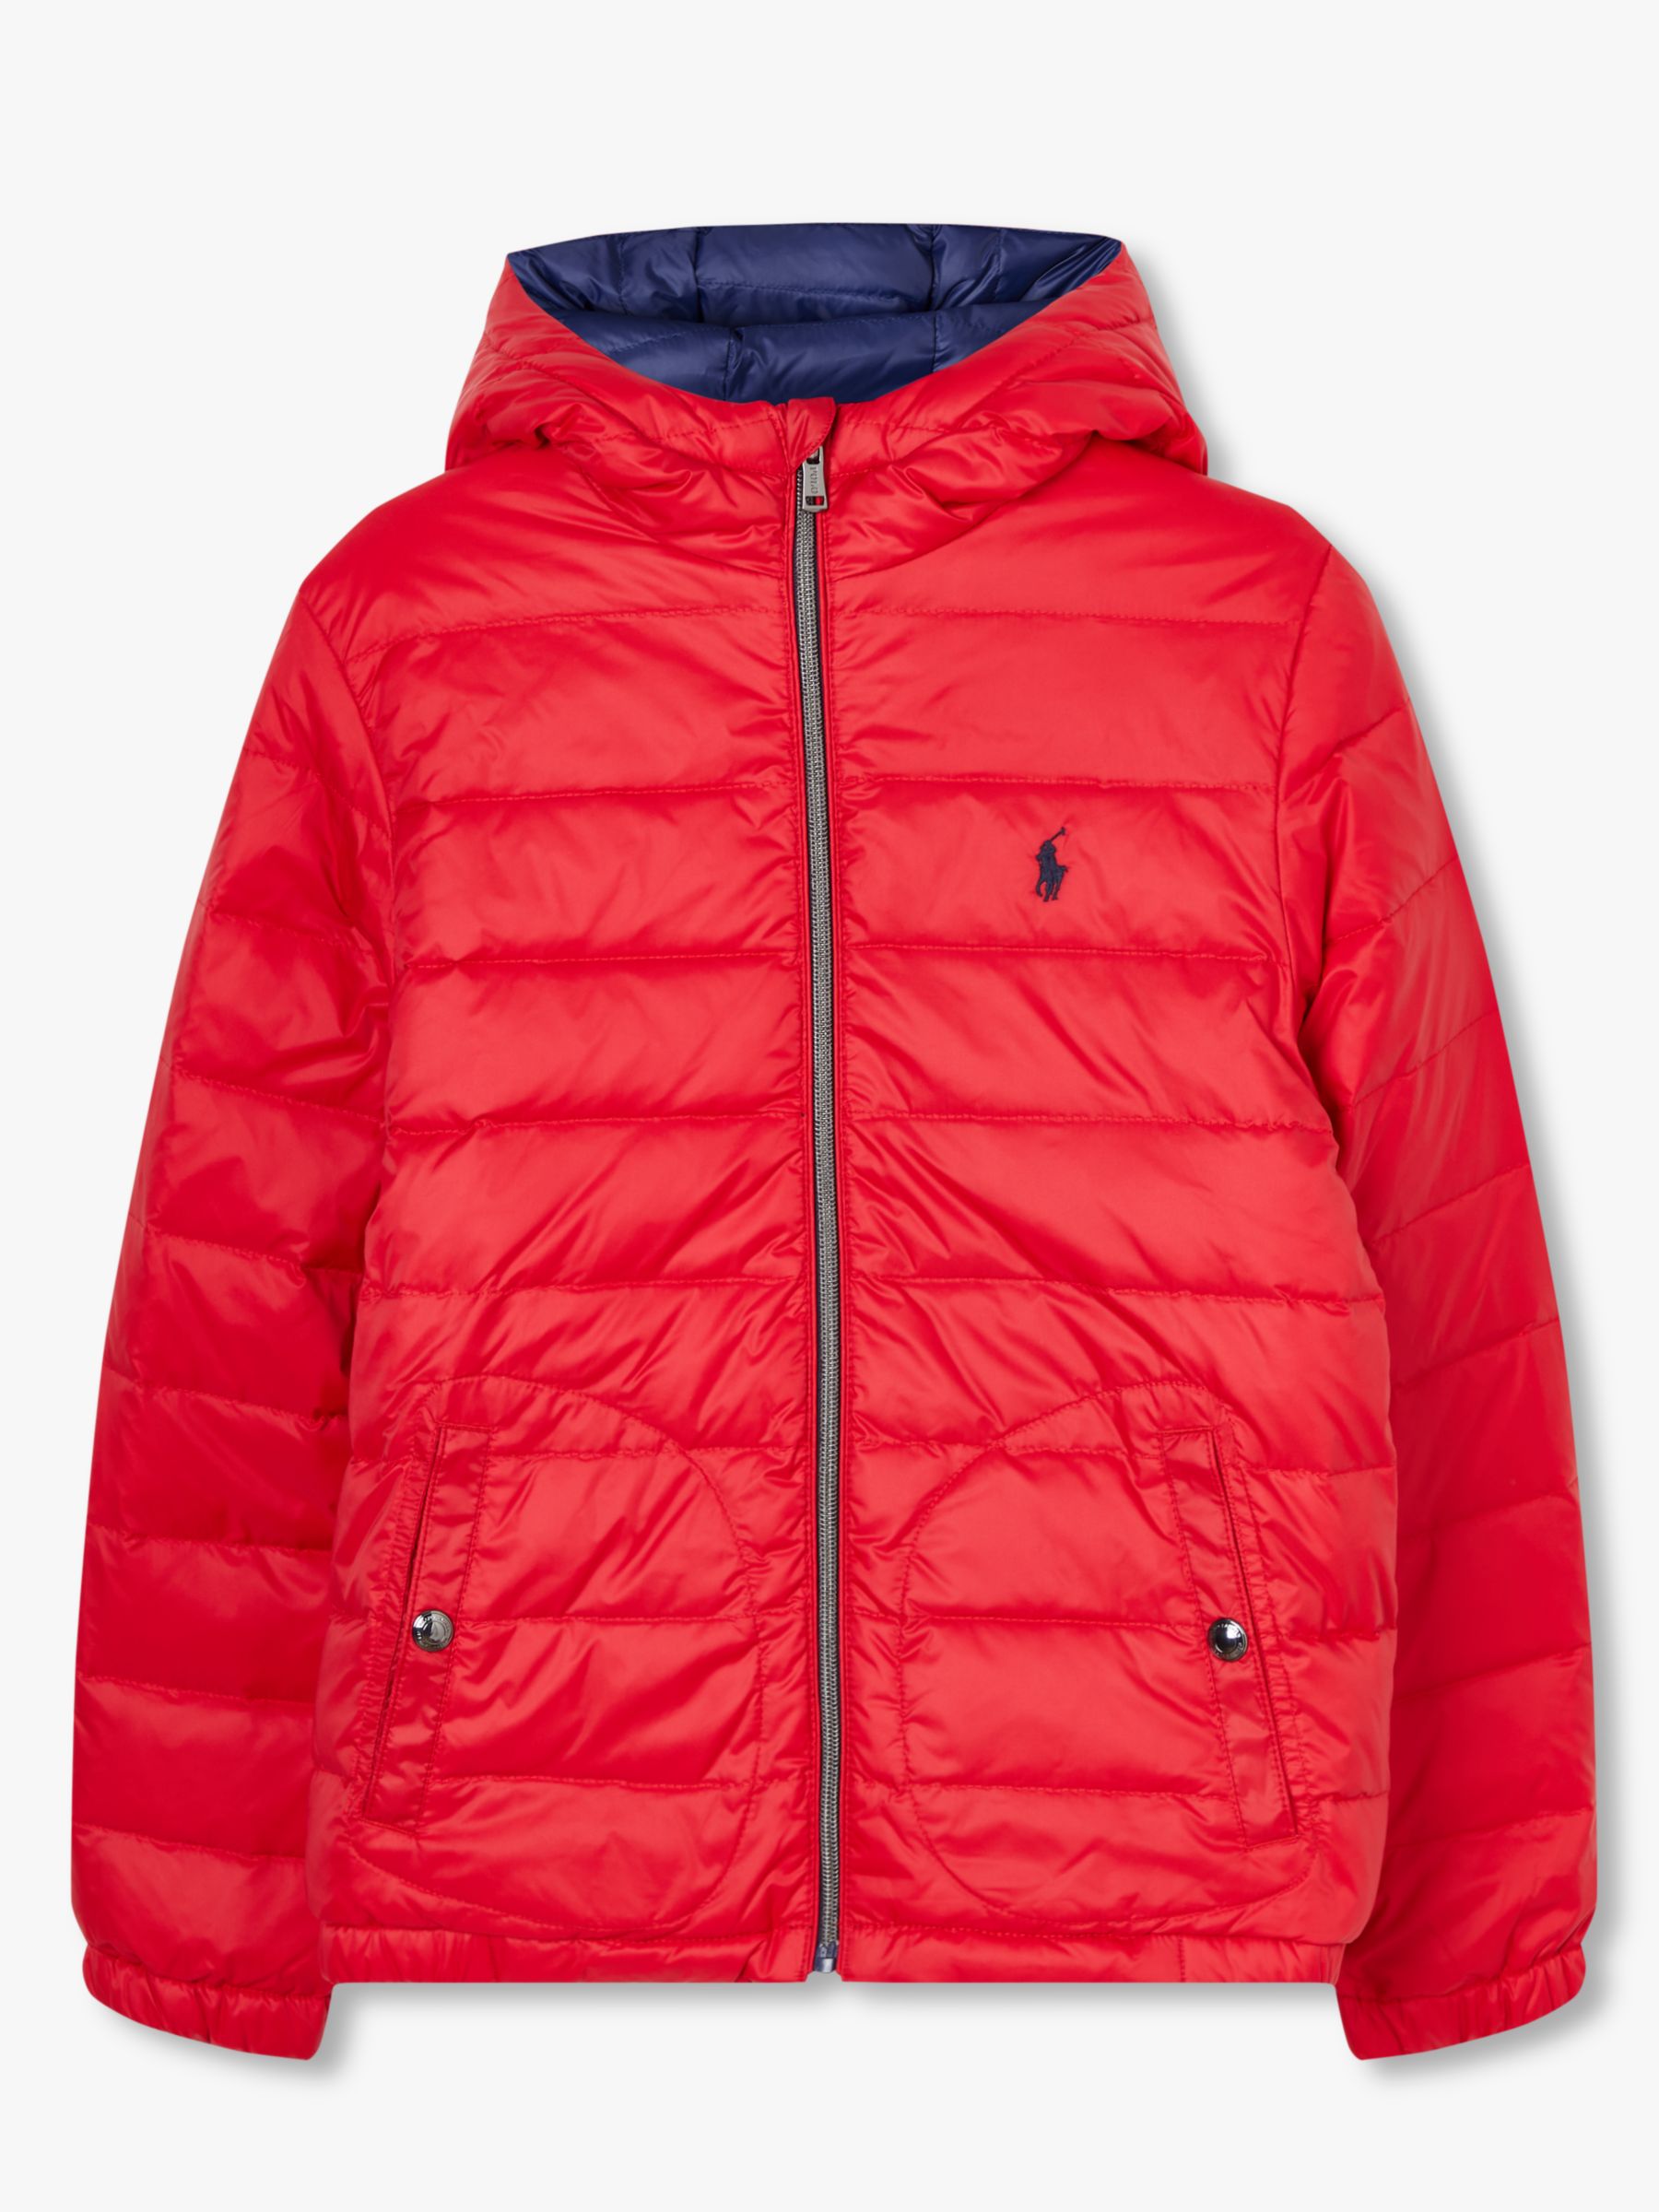 all red polo jacket